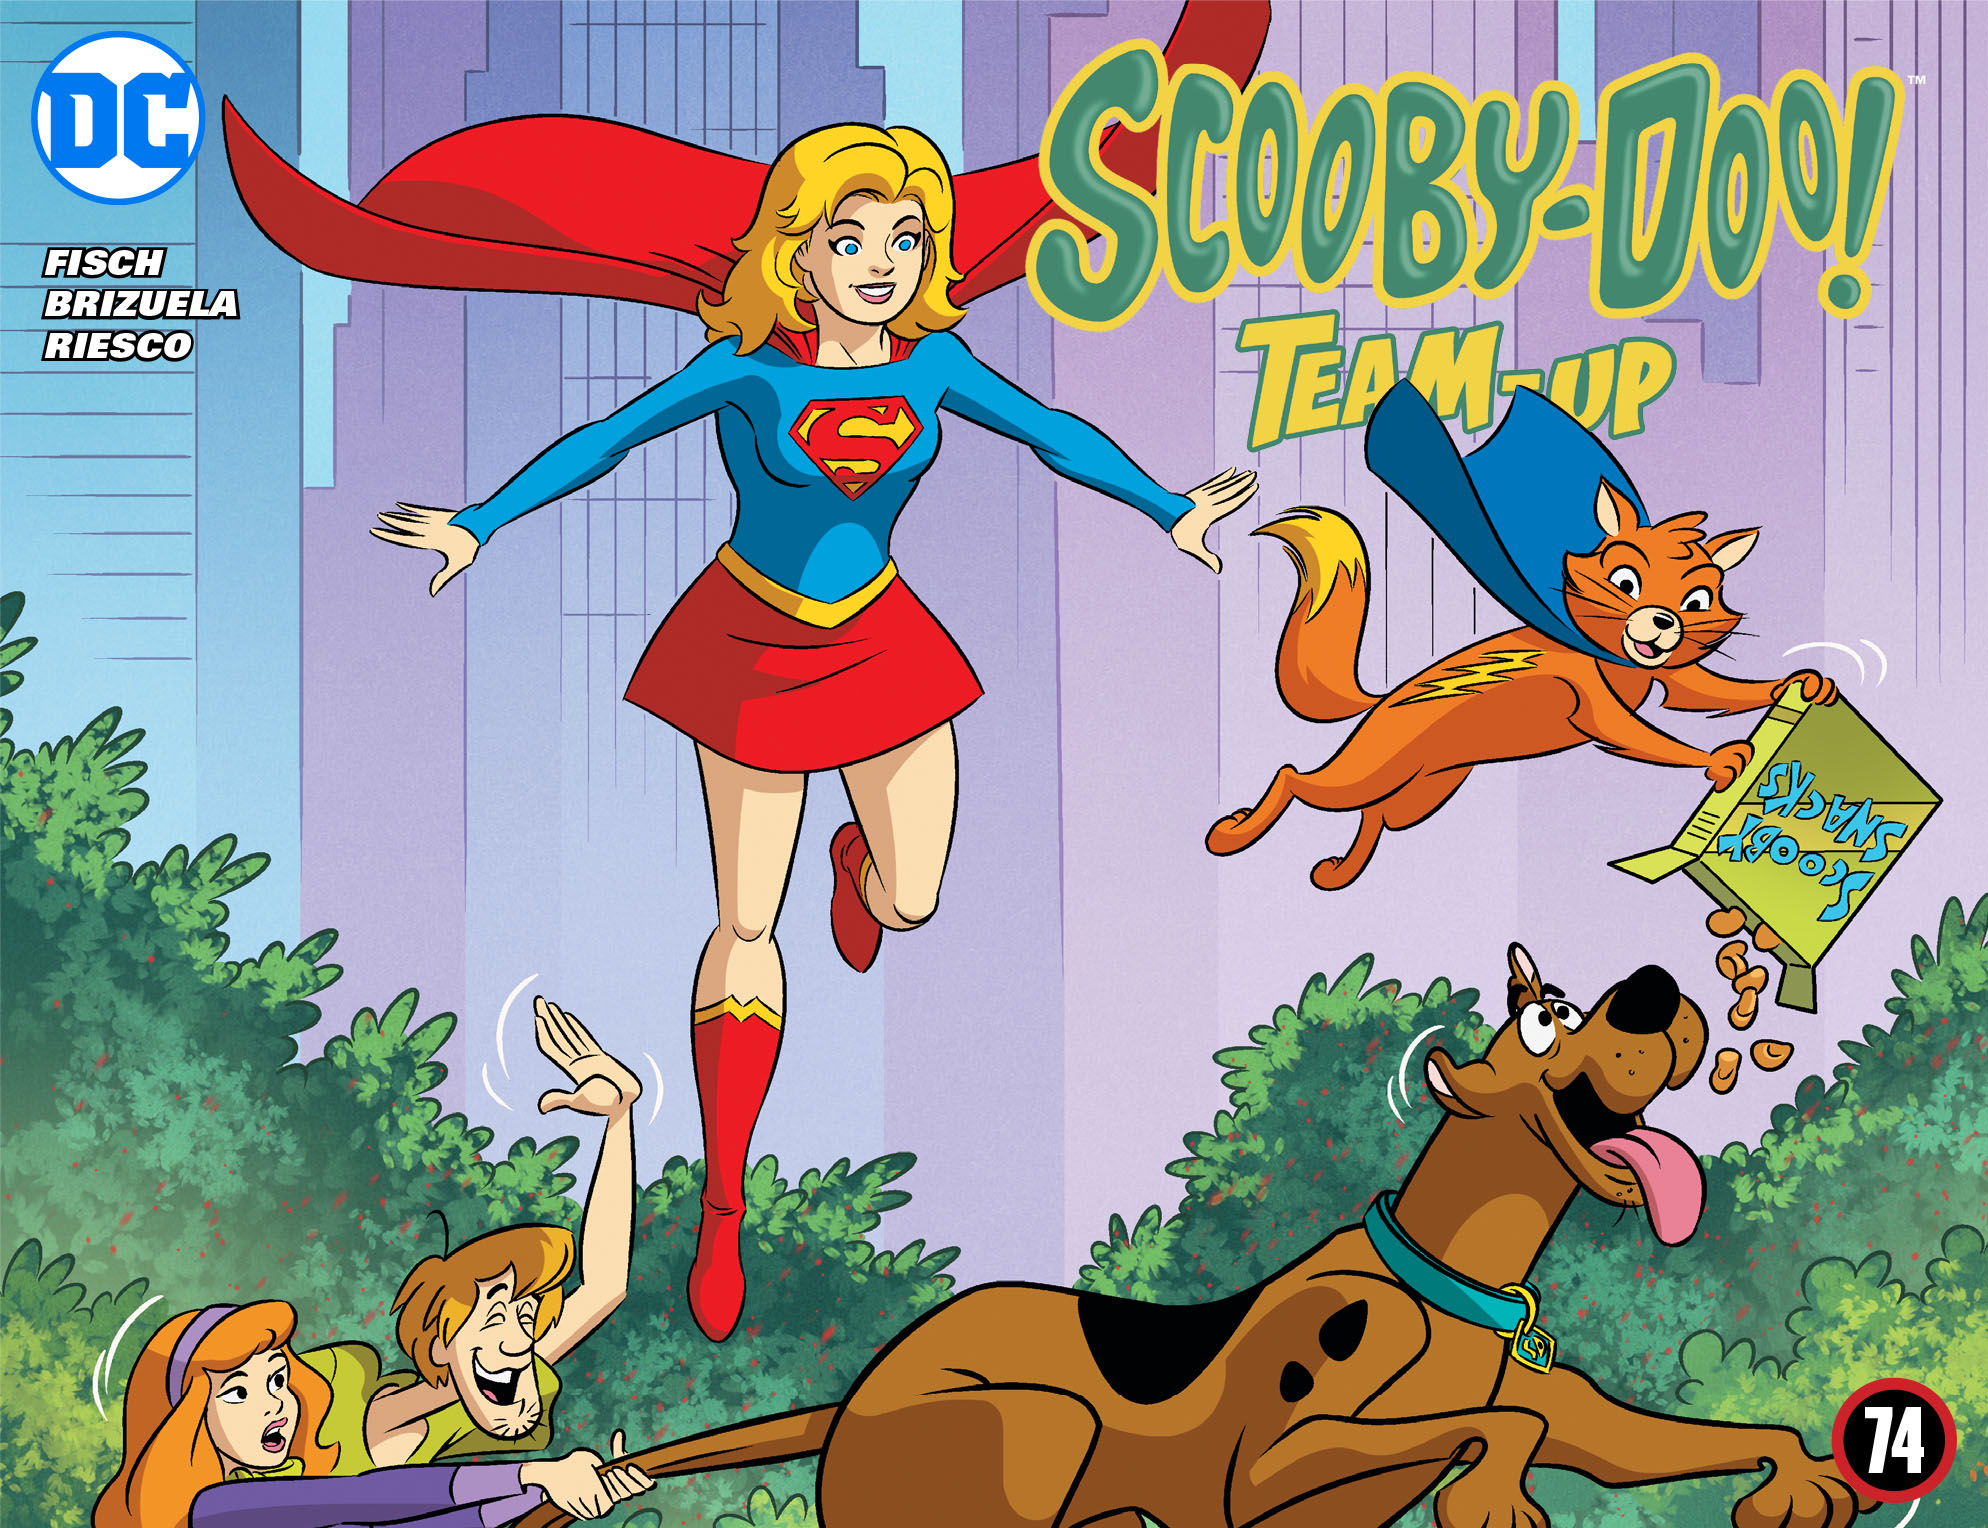 Scooby Doo Team Up Issue 74 Read Scooby Doo Team Up Issue 74 Comic